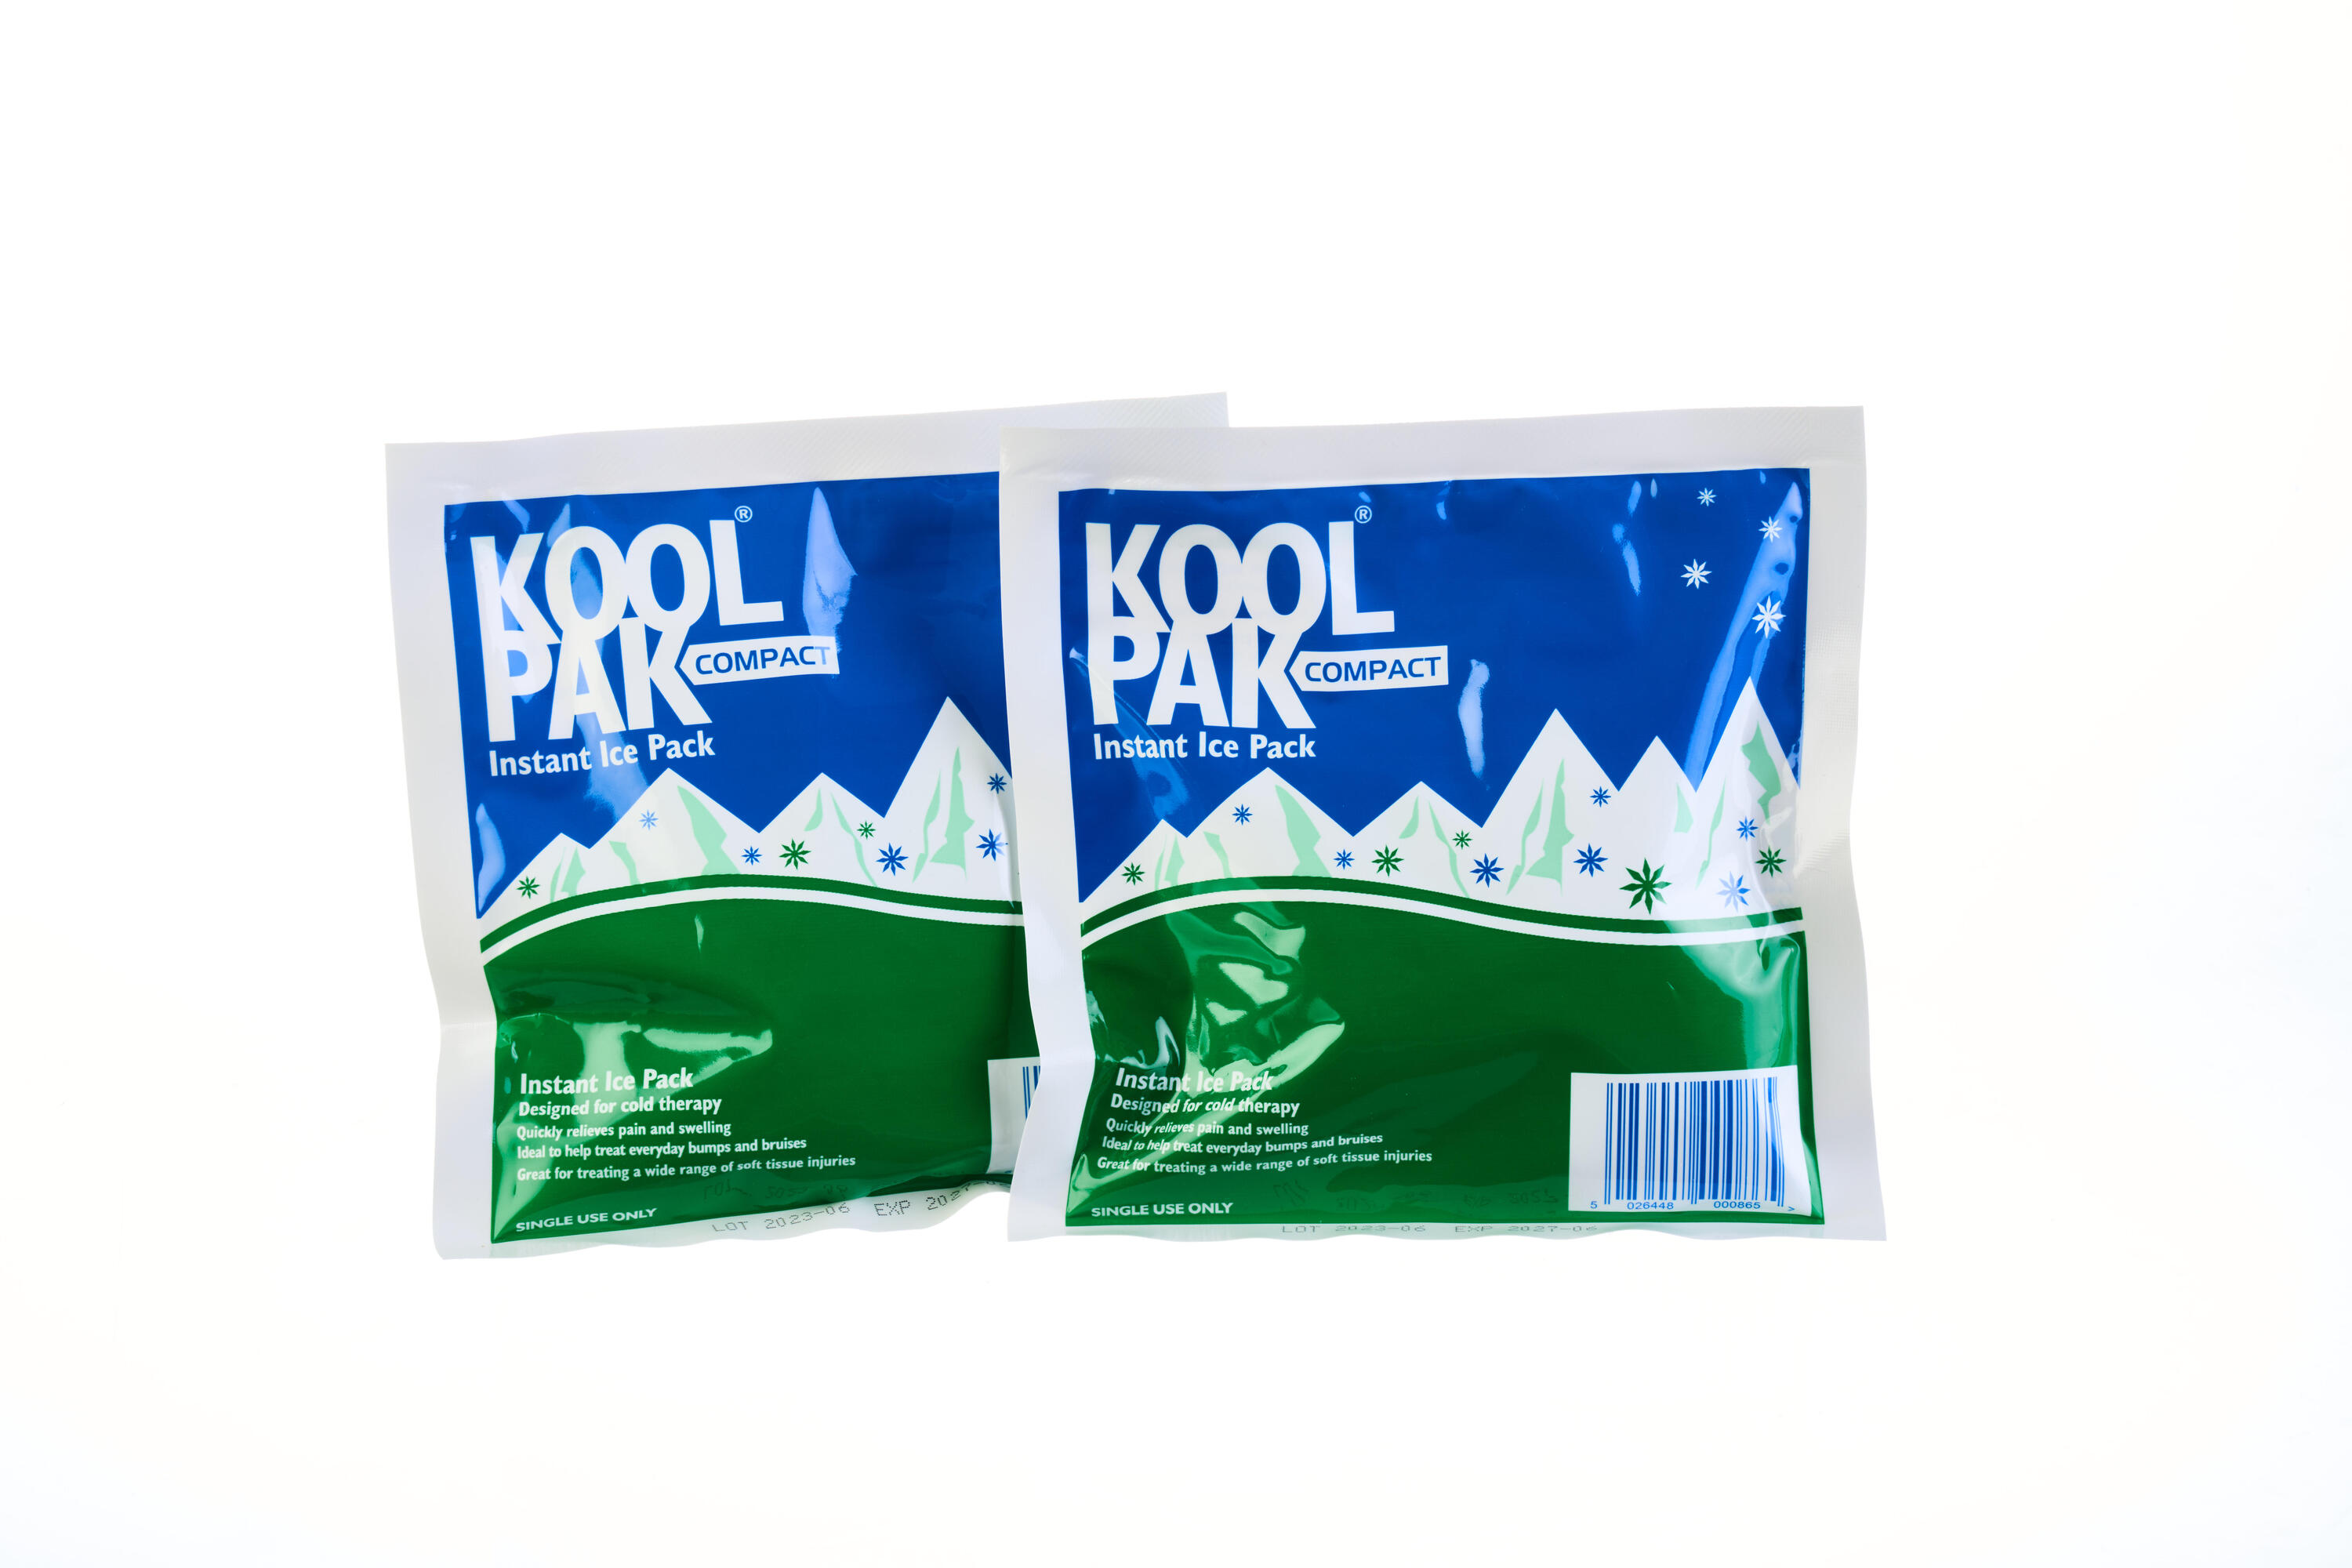 Koolpak Compact Instant Ice Pack - 15 x 15cm - Pack of 80 3/6